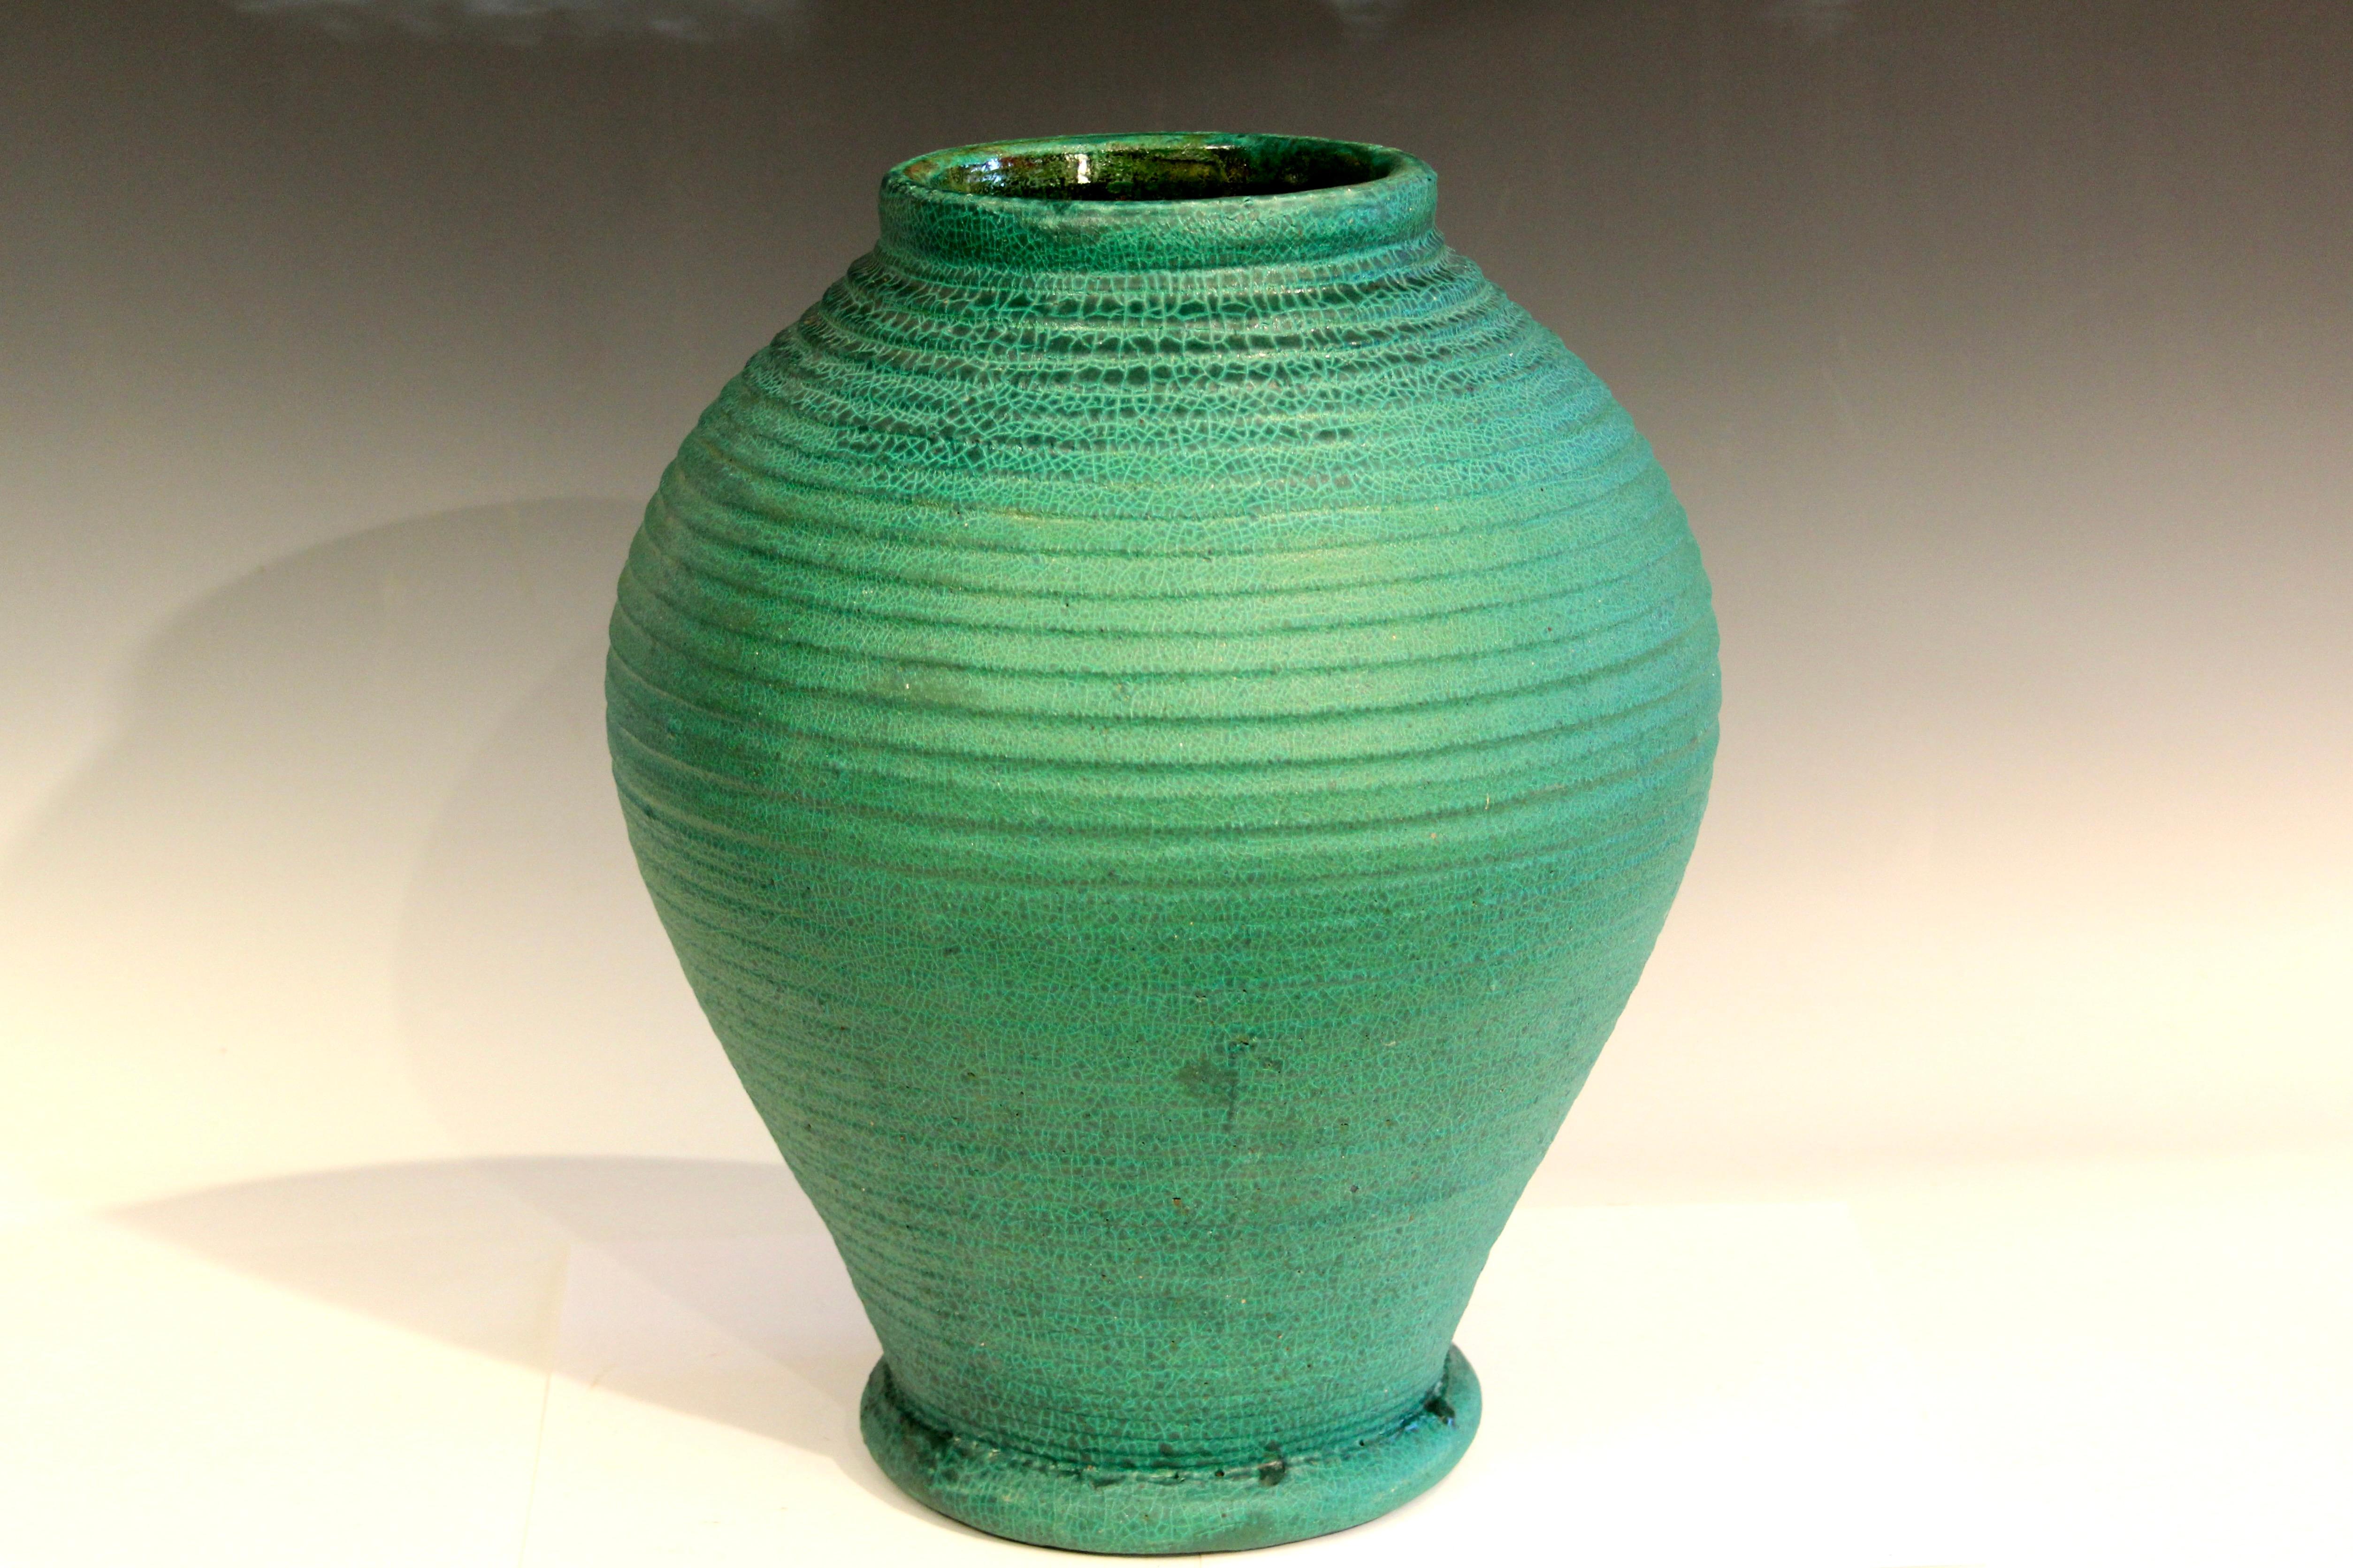 Large antique Merrimac Pottery Arts and Crafts vase in great swelling form with defined ribs and alligatored matt green glaze. Merrimac Pottery operated in Newburyport, Ma. from 1897-1908. Unmarked. 15